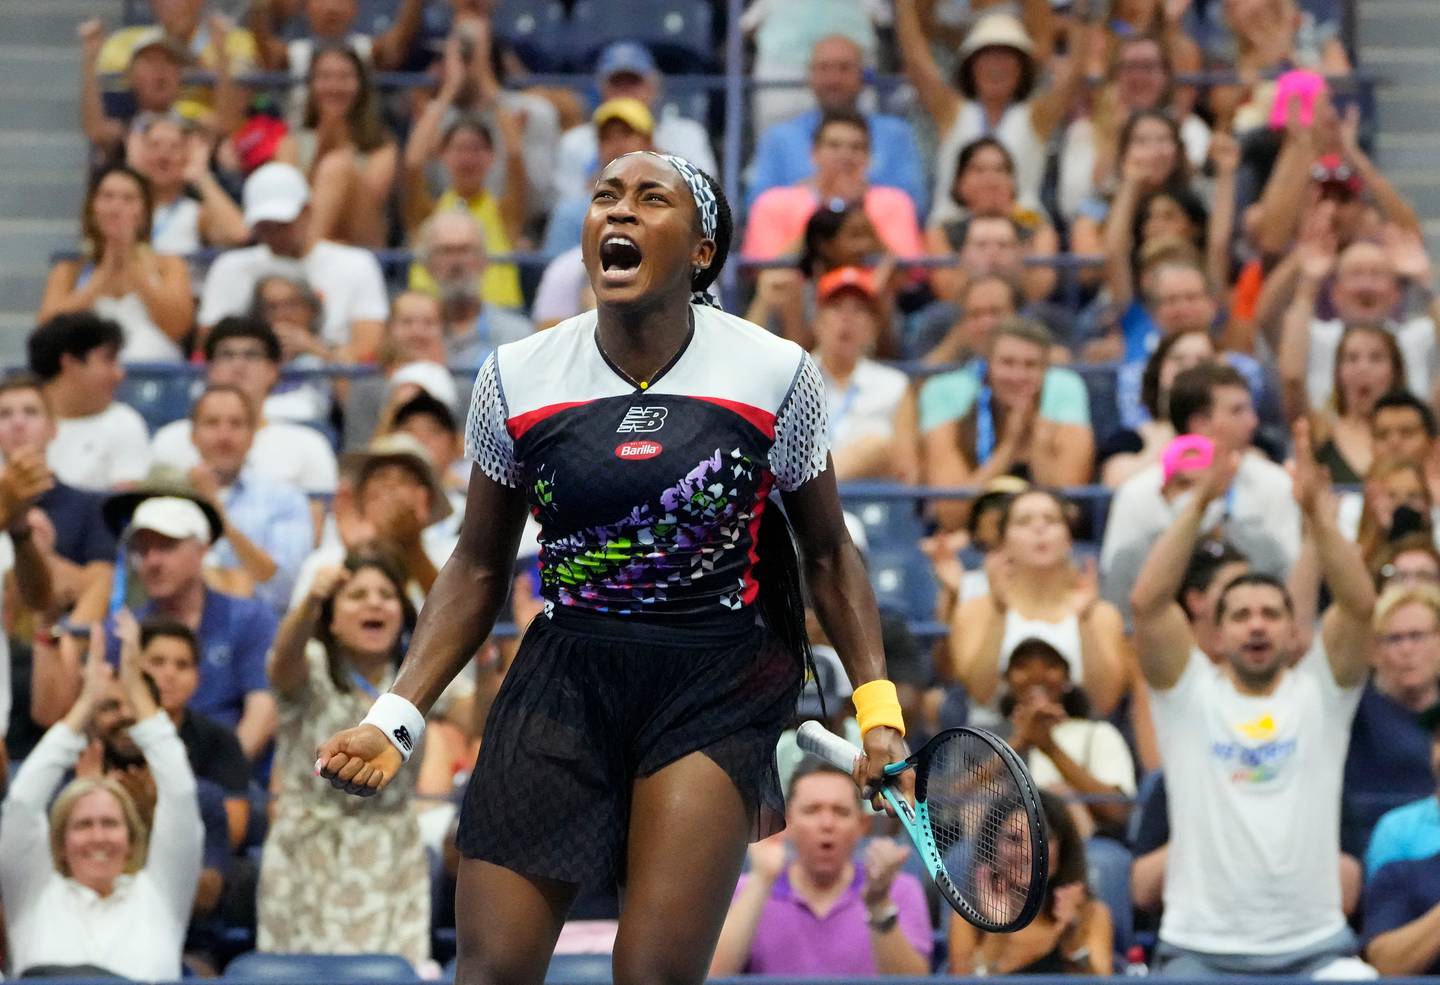 Coco Gauff of the USA after a winner against Zhang Shuai of China. Reuters